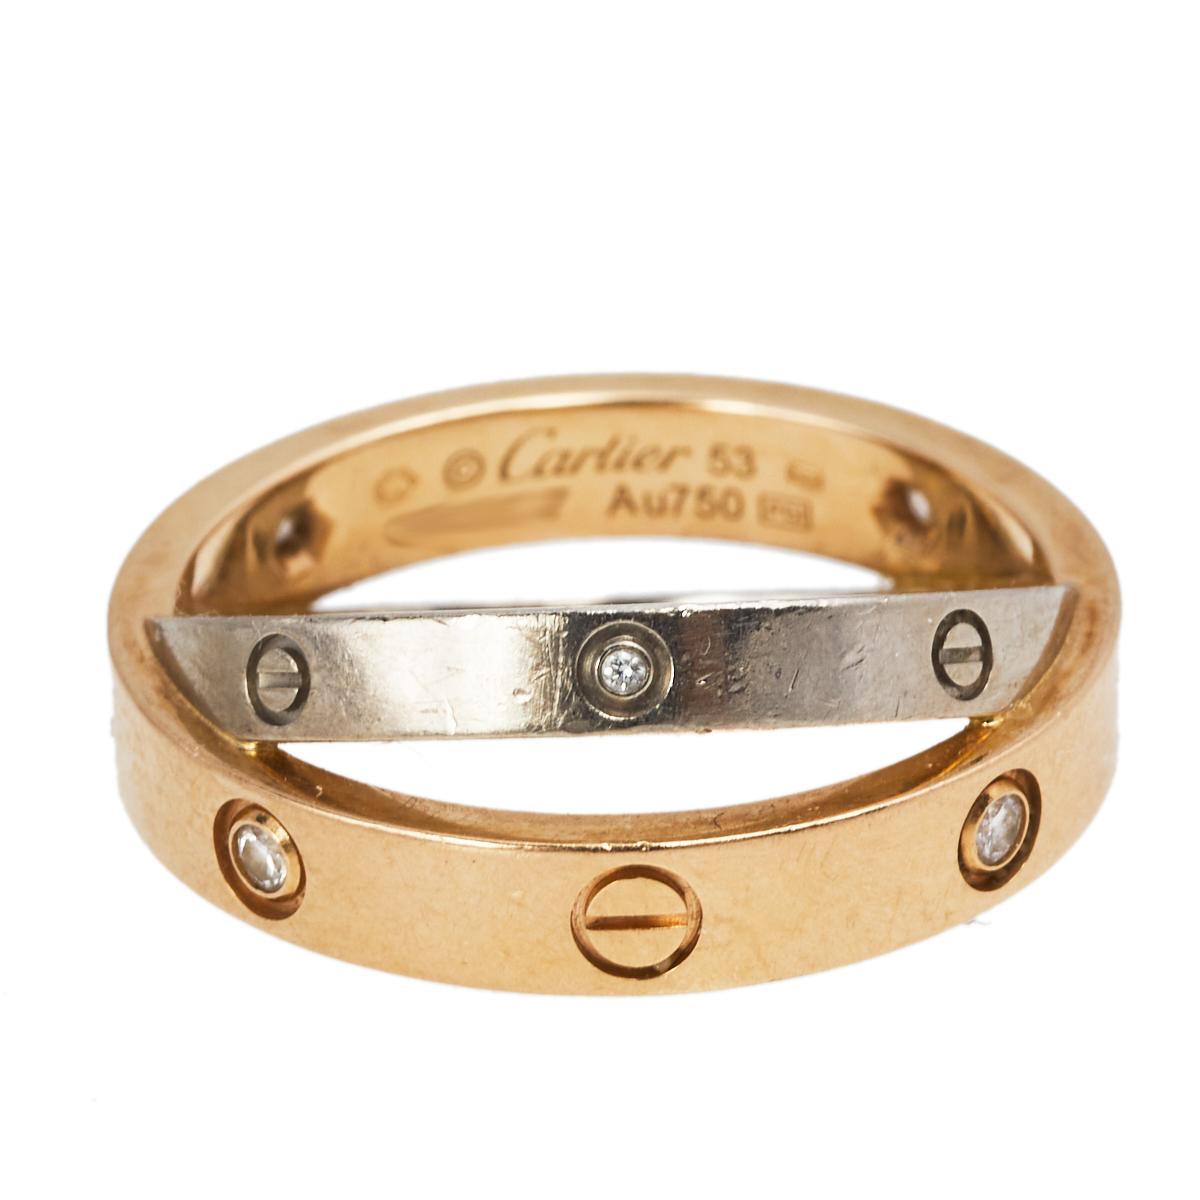 cartier 750 53 ring